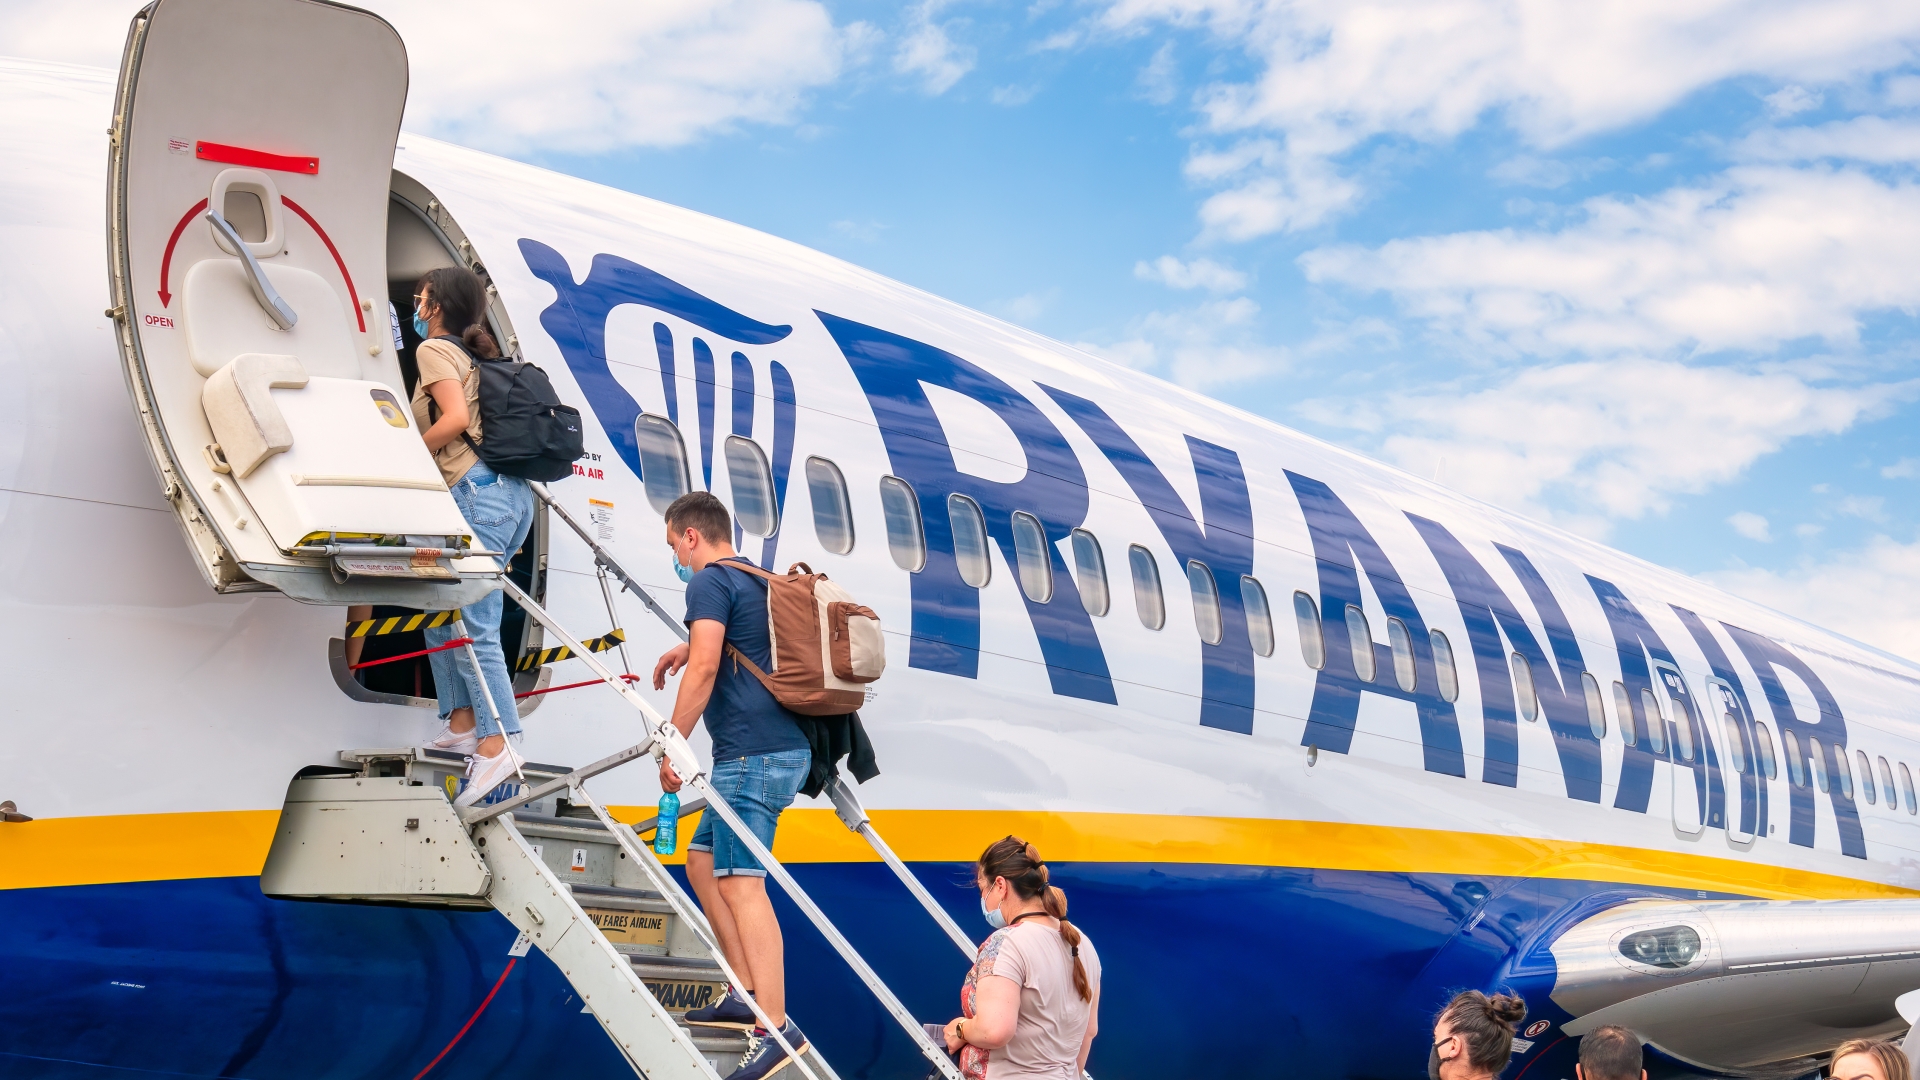 Ryanair flash sale has £4.99 flights to Spain and Italy - if you're quick